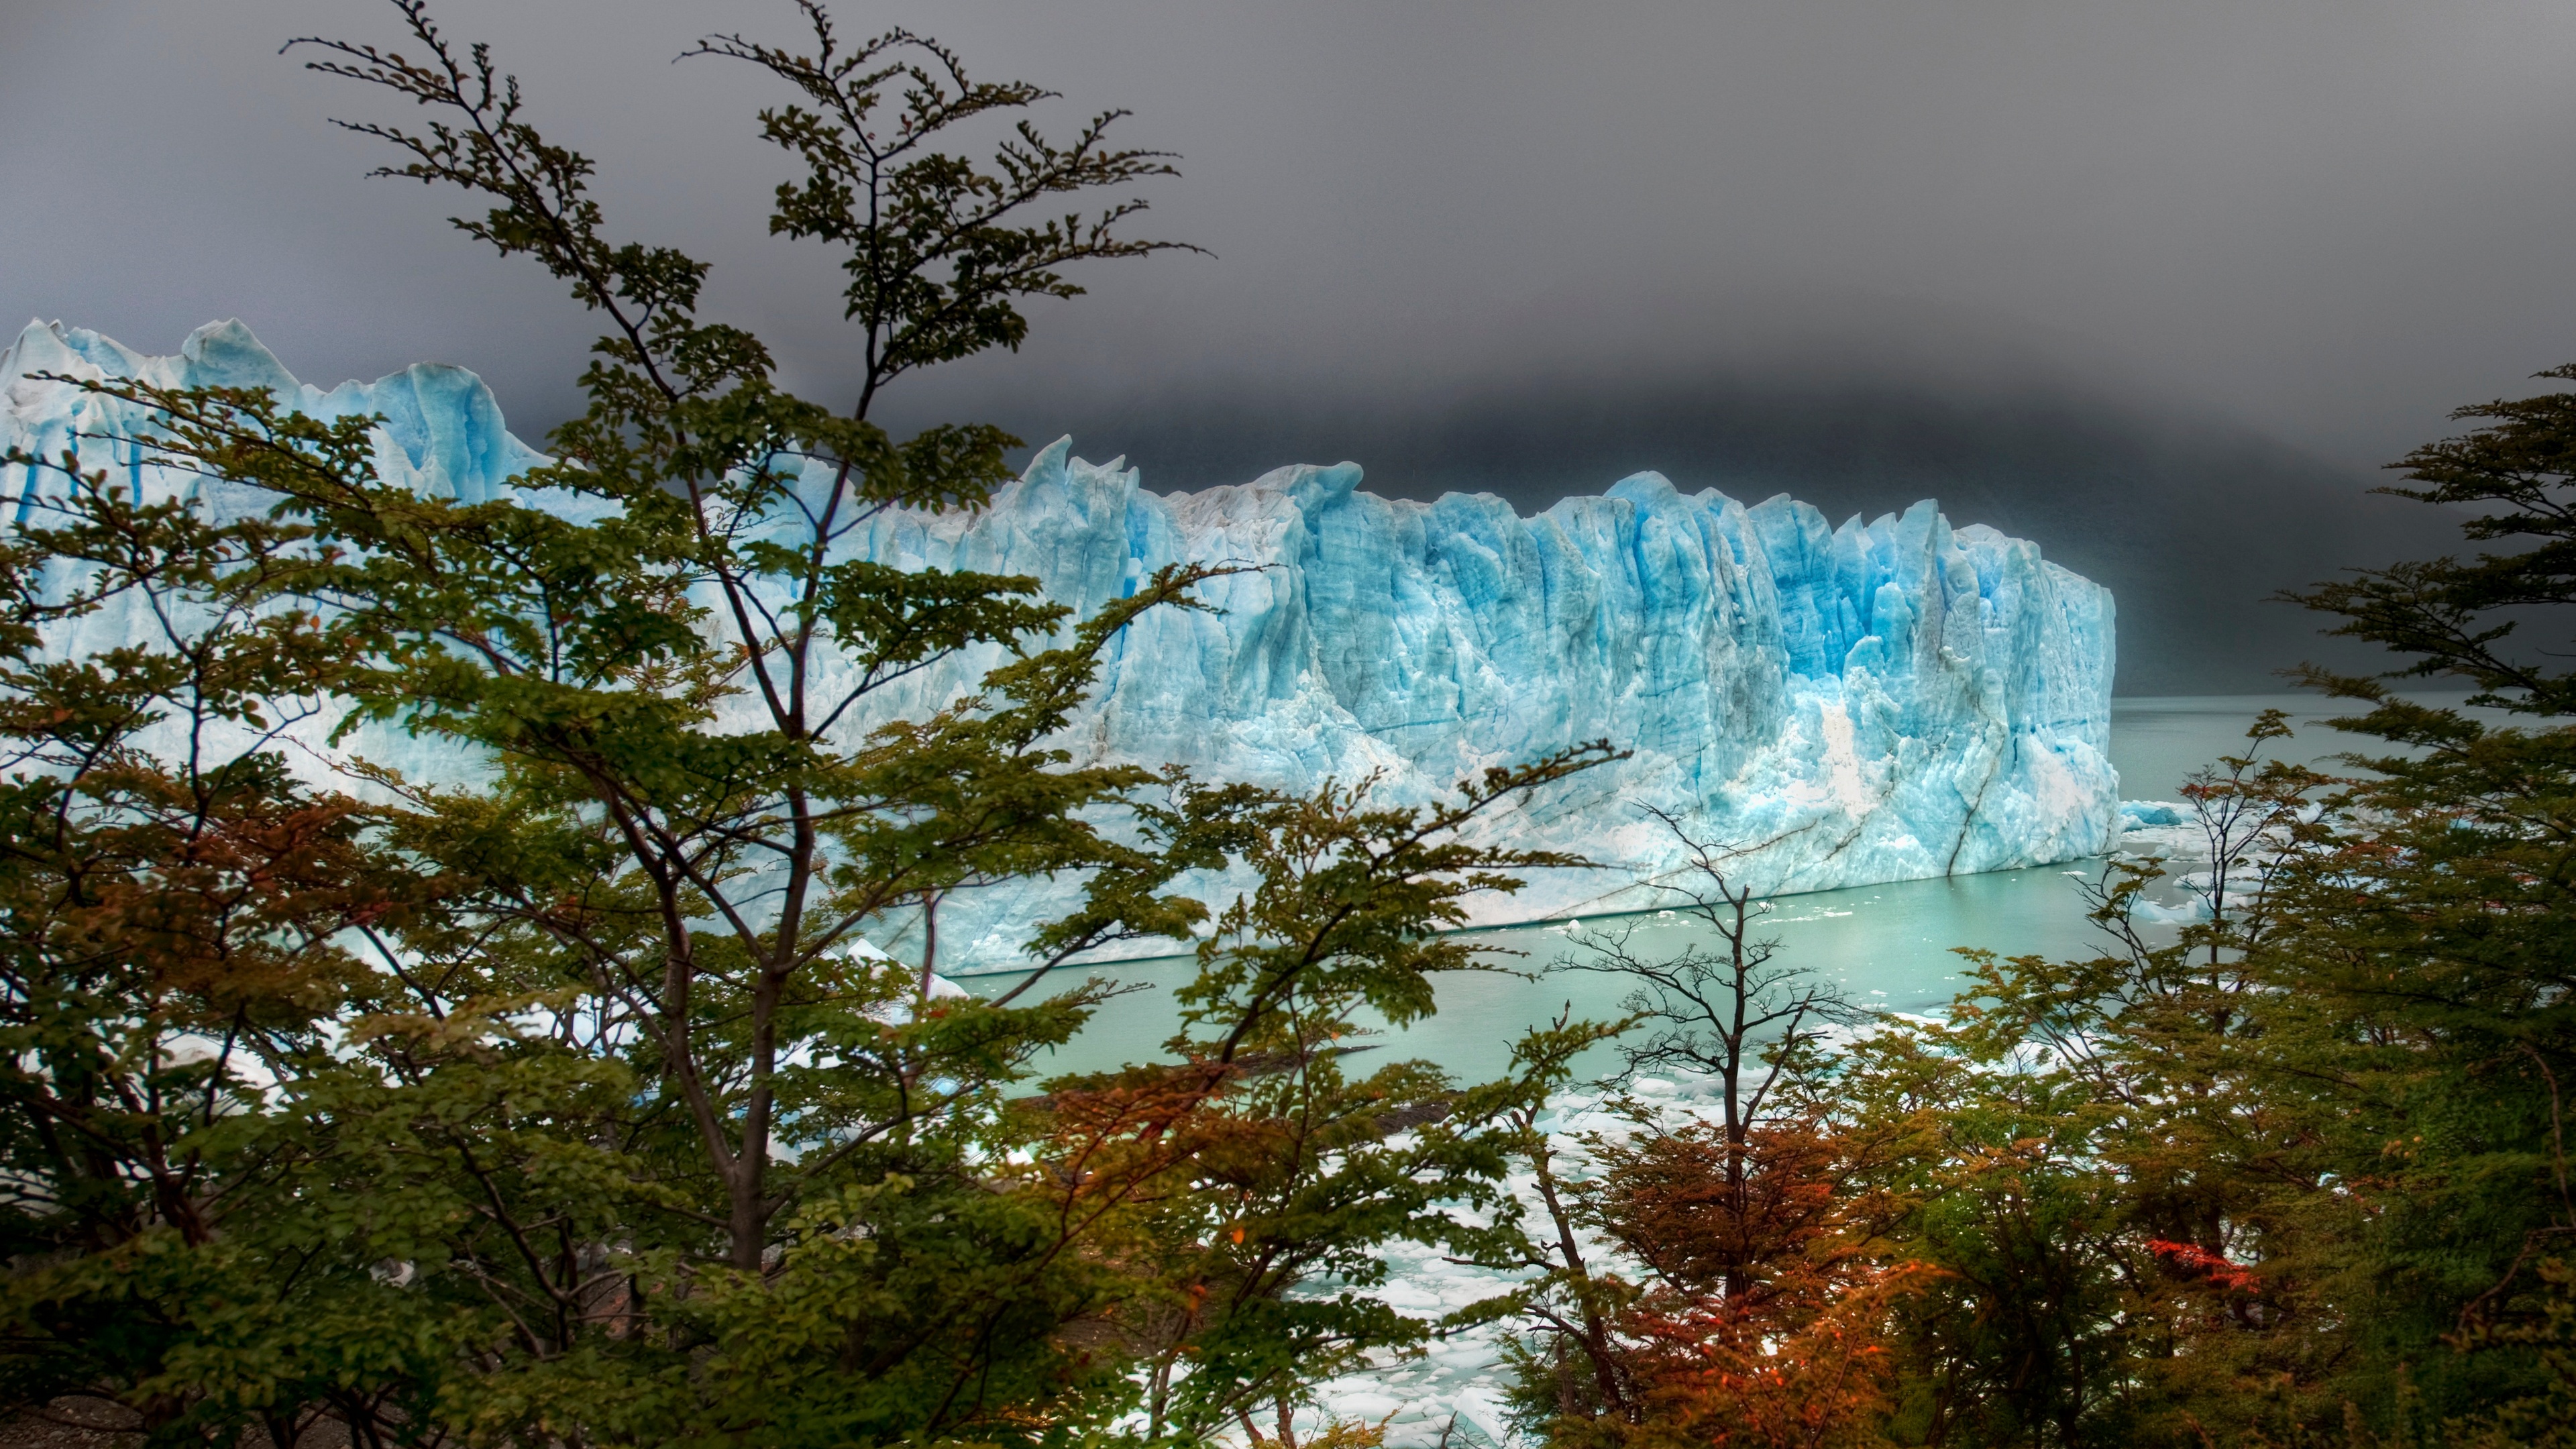 Trey Ratcliff Photography Patagonia Argentina Glacier Water Ice Trees Nature 3840x2160